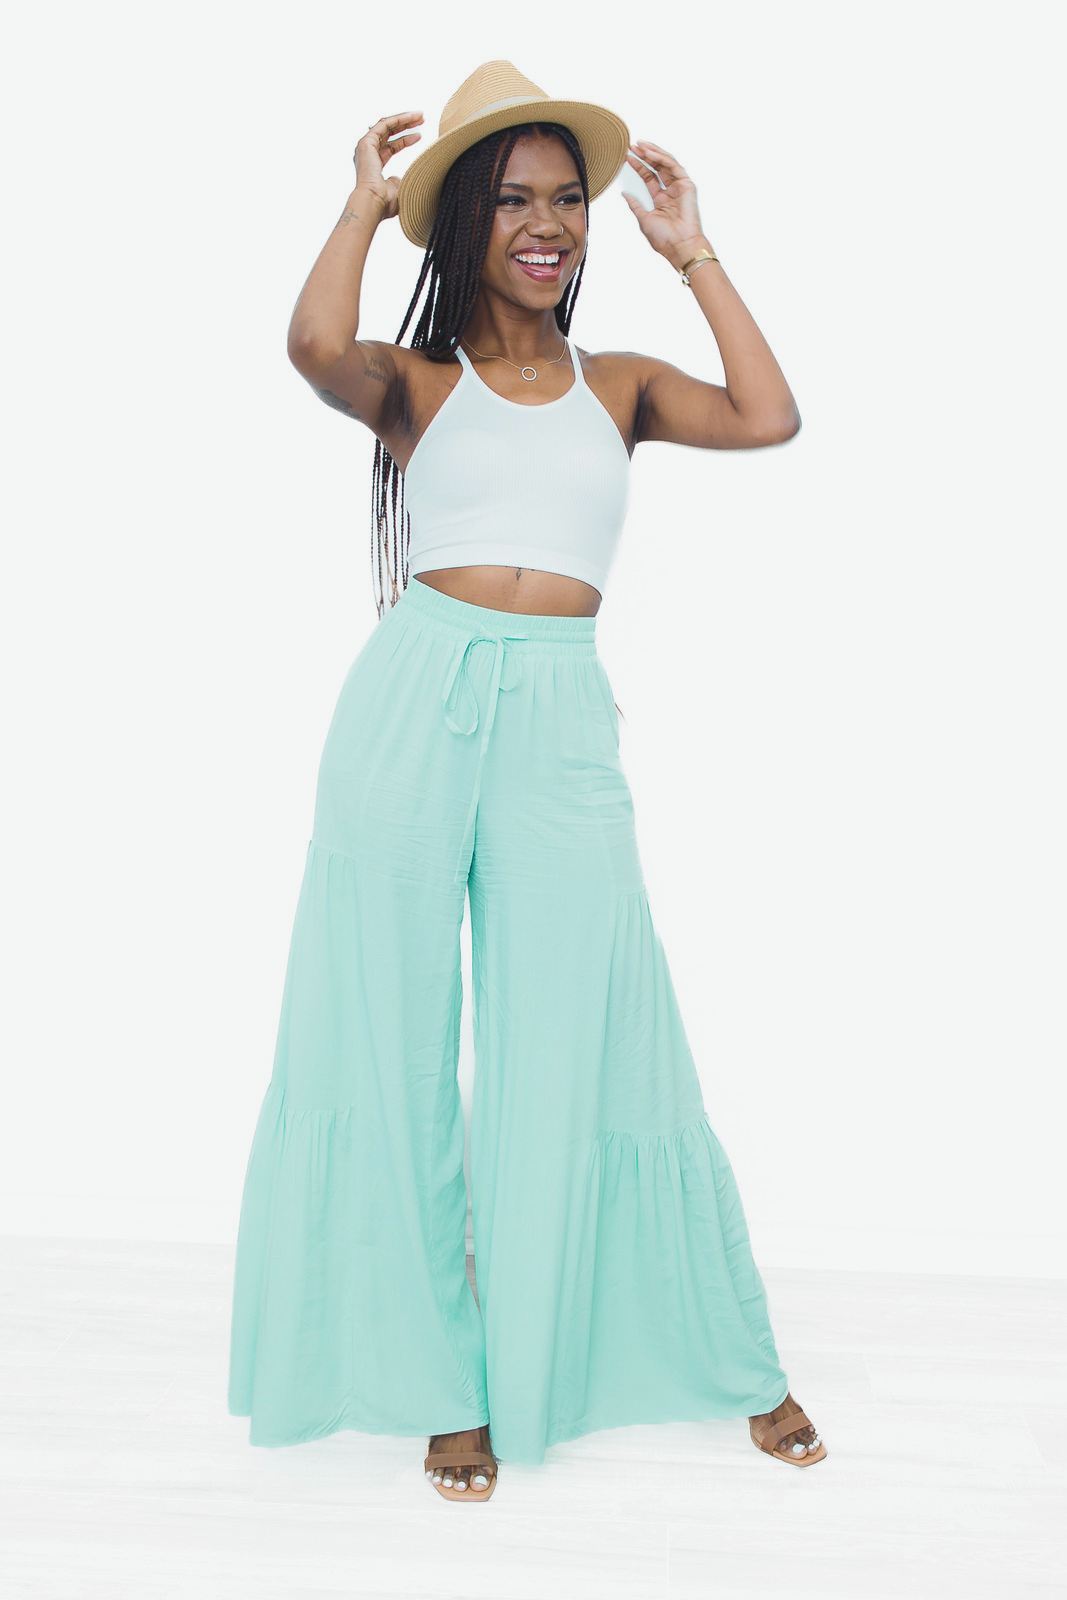 Palazzo Pants for Women Stretch High Waist Drawstring Tiered Wide Leg Pants  Casual Baggy Flowy Beach Lounge Trousers  Walmartcom